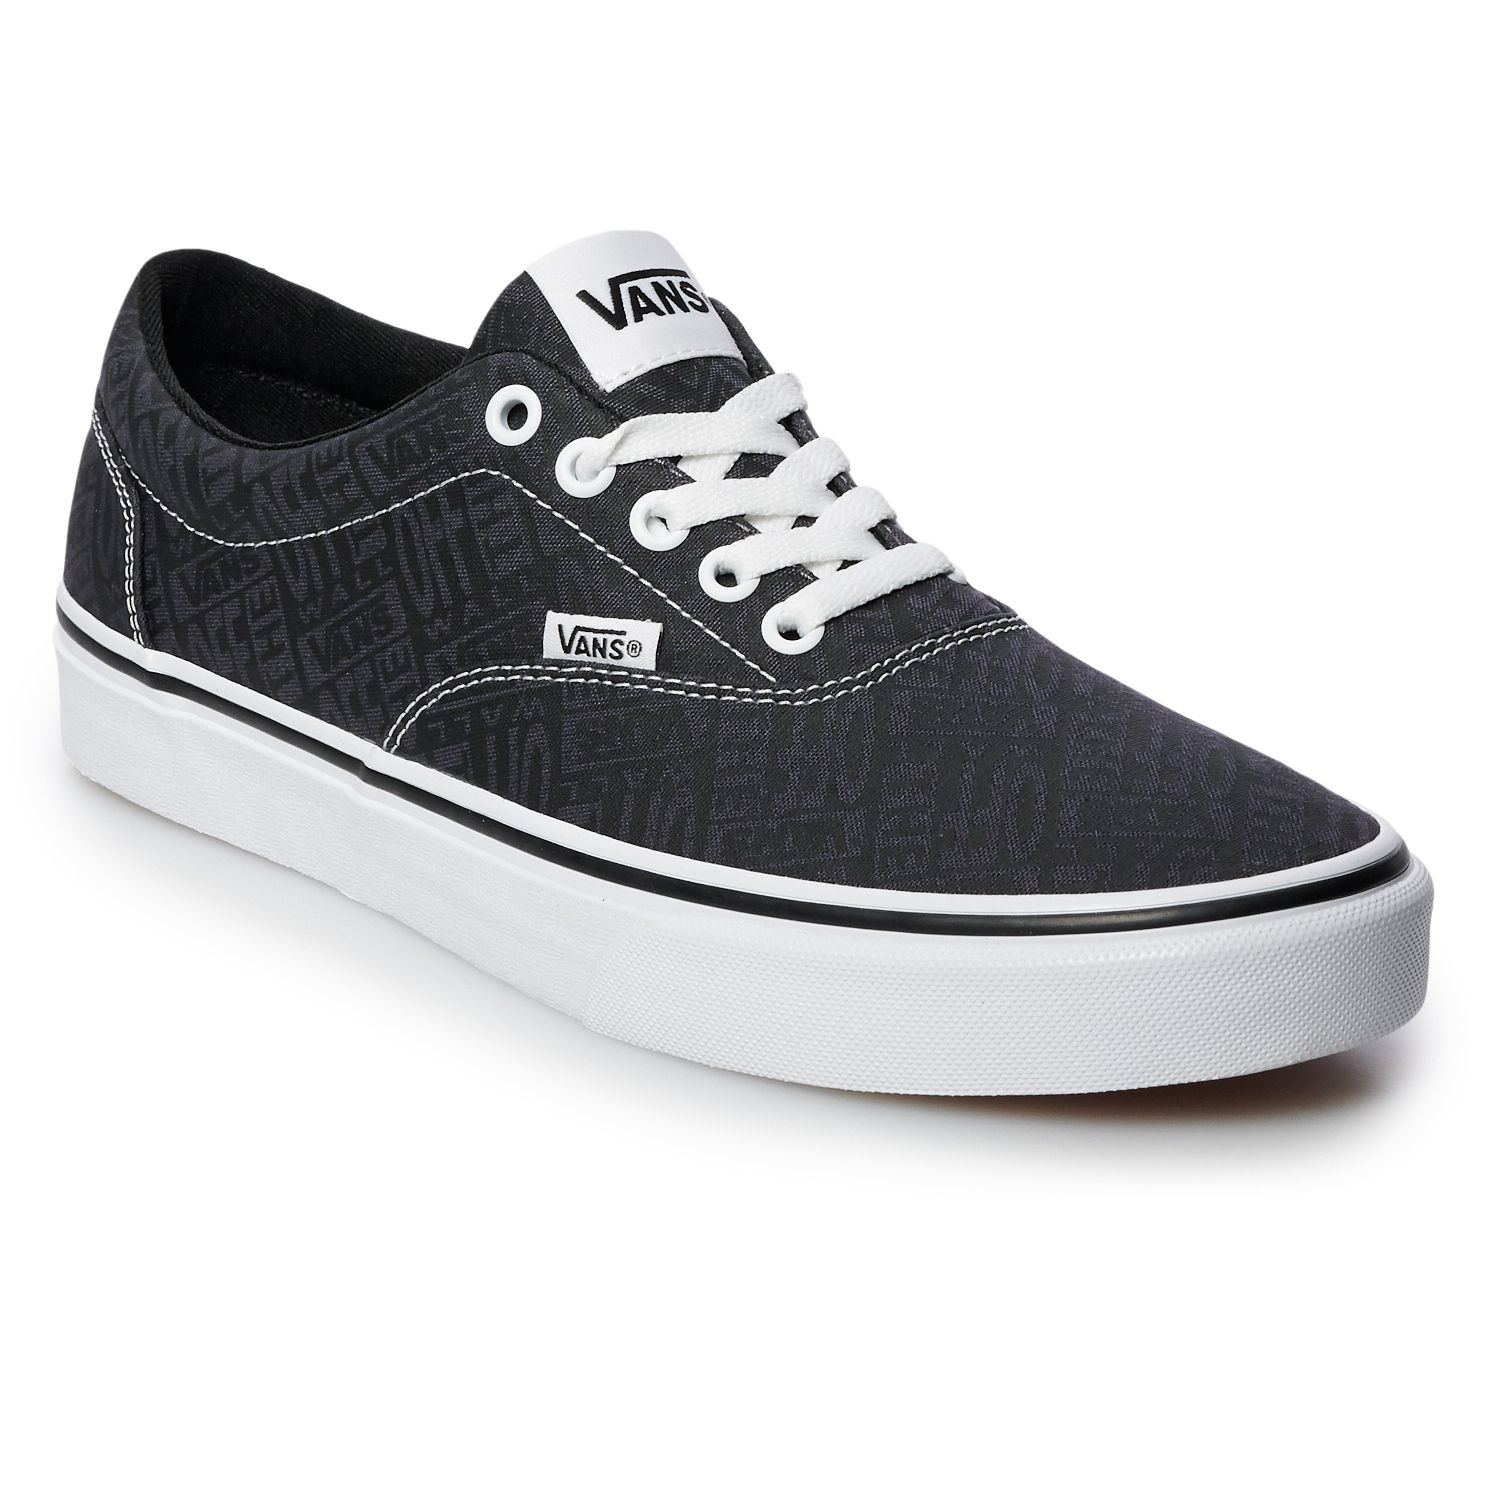 vans doheny shoes